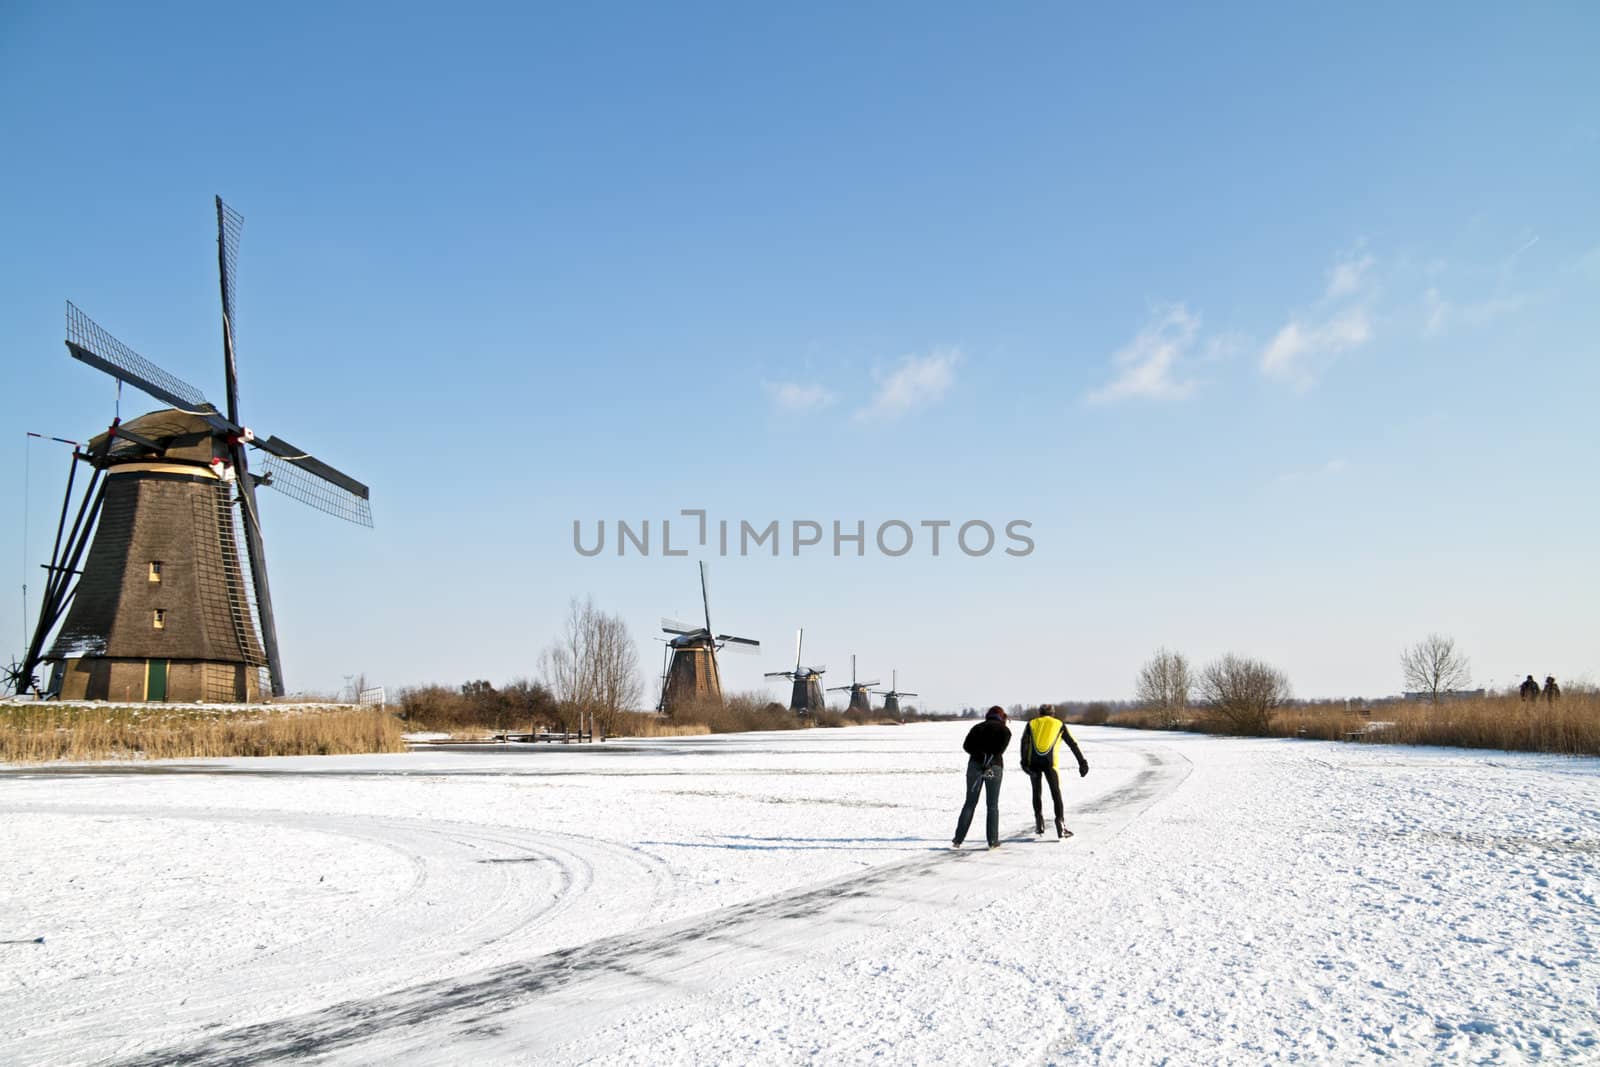 Ice skating at Kinderdijk in the winter in the Netherlands